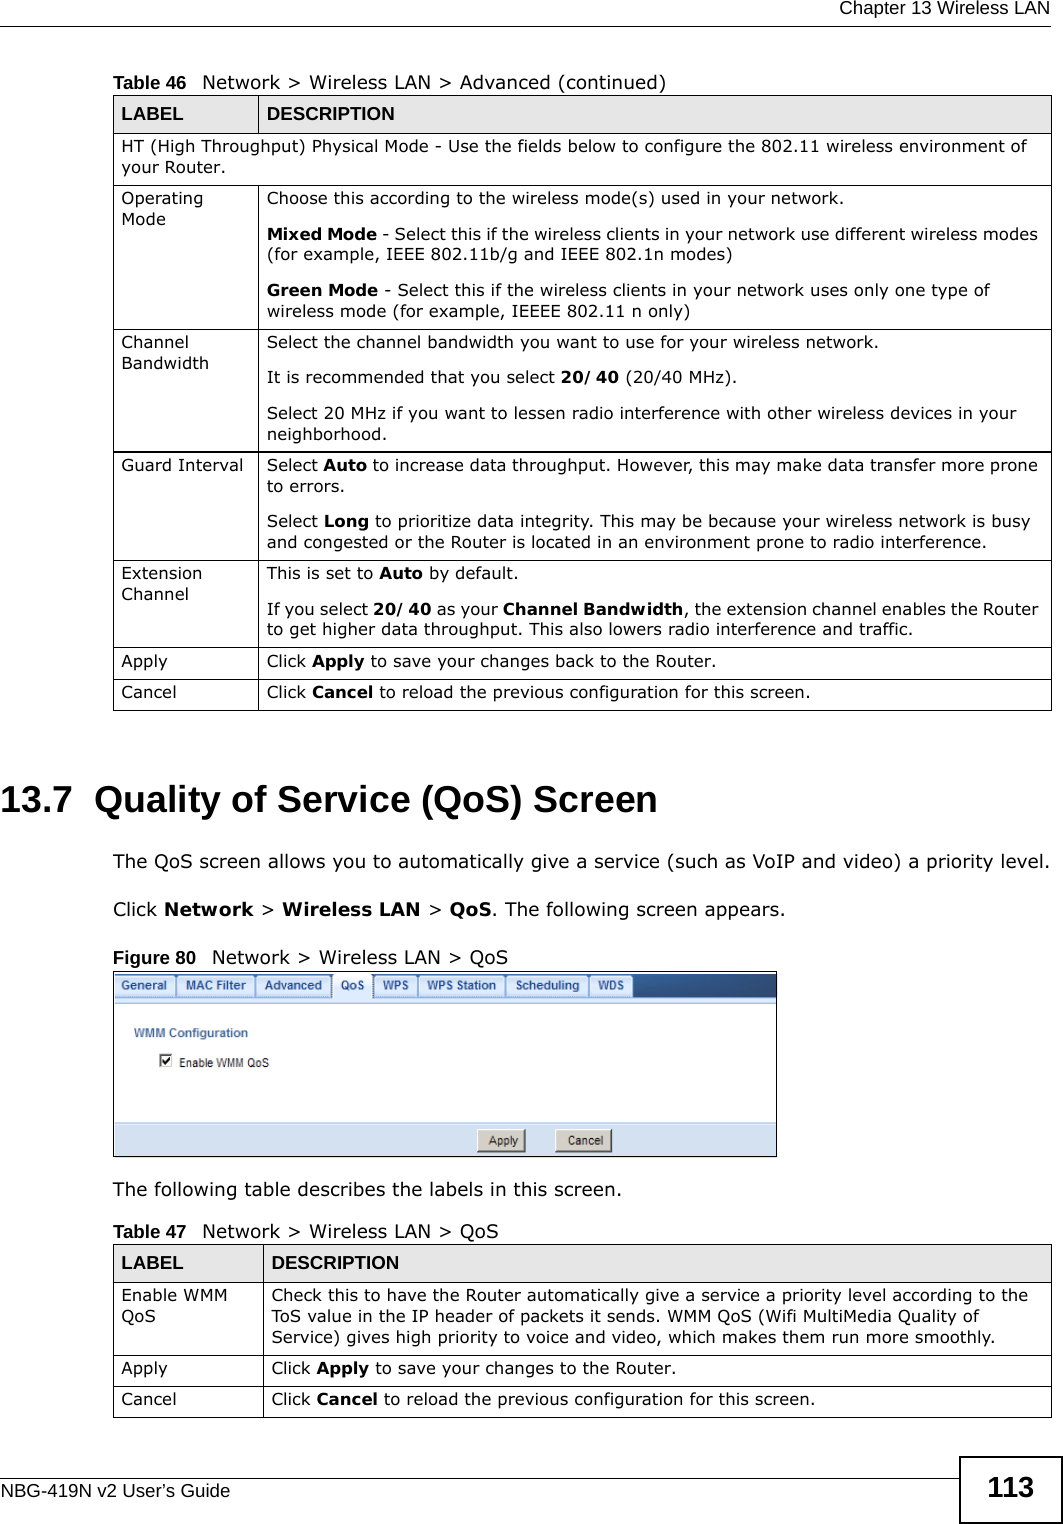  Chapter 13 Wireless LANNBG-419N v2 User’s Guide 11313.7  Quality of Service (QoS) ScreenThe QoS screen allows you to automatically give a service (such as VoIP and video) a priority level.Click Network &gt; Wireless LAN &gt; QoS. The following screen appears.Figure 80   Network &gt; Wireless LAN &gt; QoS The following table describes the labels in this screen. HT (High Throughput) Physical Mode - Use the fields below to configure the 802.11 wireless environment of your Router. Operating ModeChoose this according to the wireless mode(s) used in your network.Mixed Mode - Select this if the wireless clients in your network use different wireless modes (for example, IEEE 802.11b/g and IEEE 802.1n modes)Green Mode - Select this if the wireless clients in your network uses only one type of wireless mode (for example, IEEEE 802.11 n only)Channel BandwidthSelect the channel bandwidth you want to use for your wireless network.It is recommended that you select 20/40 (20/40 MHz). Select 20 MHz if you want to lessen radio interference with other wireless devices in your neighborhood.Guard Interval Select Auto to increase data throughput. However, this may make data transfer more prone to errors.Select Long to prioritize data integrity. This may be because your wireless network is busy and congested or the Router is located in an environment prone to radio interference.Extension ChannelThis is set to Auto by default. If you select 20/40 as your Channel Bandwidth, the extension channel enables the Router to get higher data throughput. This also lowers radio interference and traffic.Apply Click Apply to save your changes back to the Router.Cancel Click Cancel to reload the previous configuration for this screen.Table 46   Network &gt; Wireless LAN &gt; Advanced (continued)LABEL DESCRIPTIONTable 47   Network &gt; Wireless LAN &gt; QoSLABEL DESCRIPTIONEnable WMM QoSCheck this to have the Router automatically give a service a priority level according to the ToS value in the IP header of packets it sends. WMM QoS (Wifi MultiMedia Quality of Service) gives high priority to voice and video, which makes them run more smoothly.Apply Click Apply to save your changes to the Router.Cancel Click Cancel to reload the previous configuration for this screen.